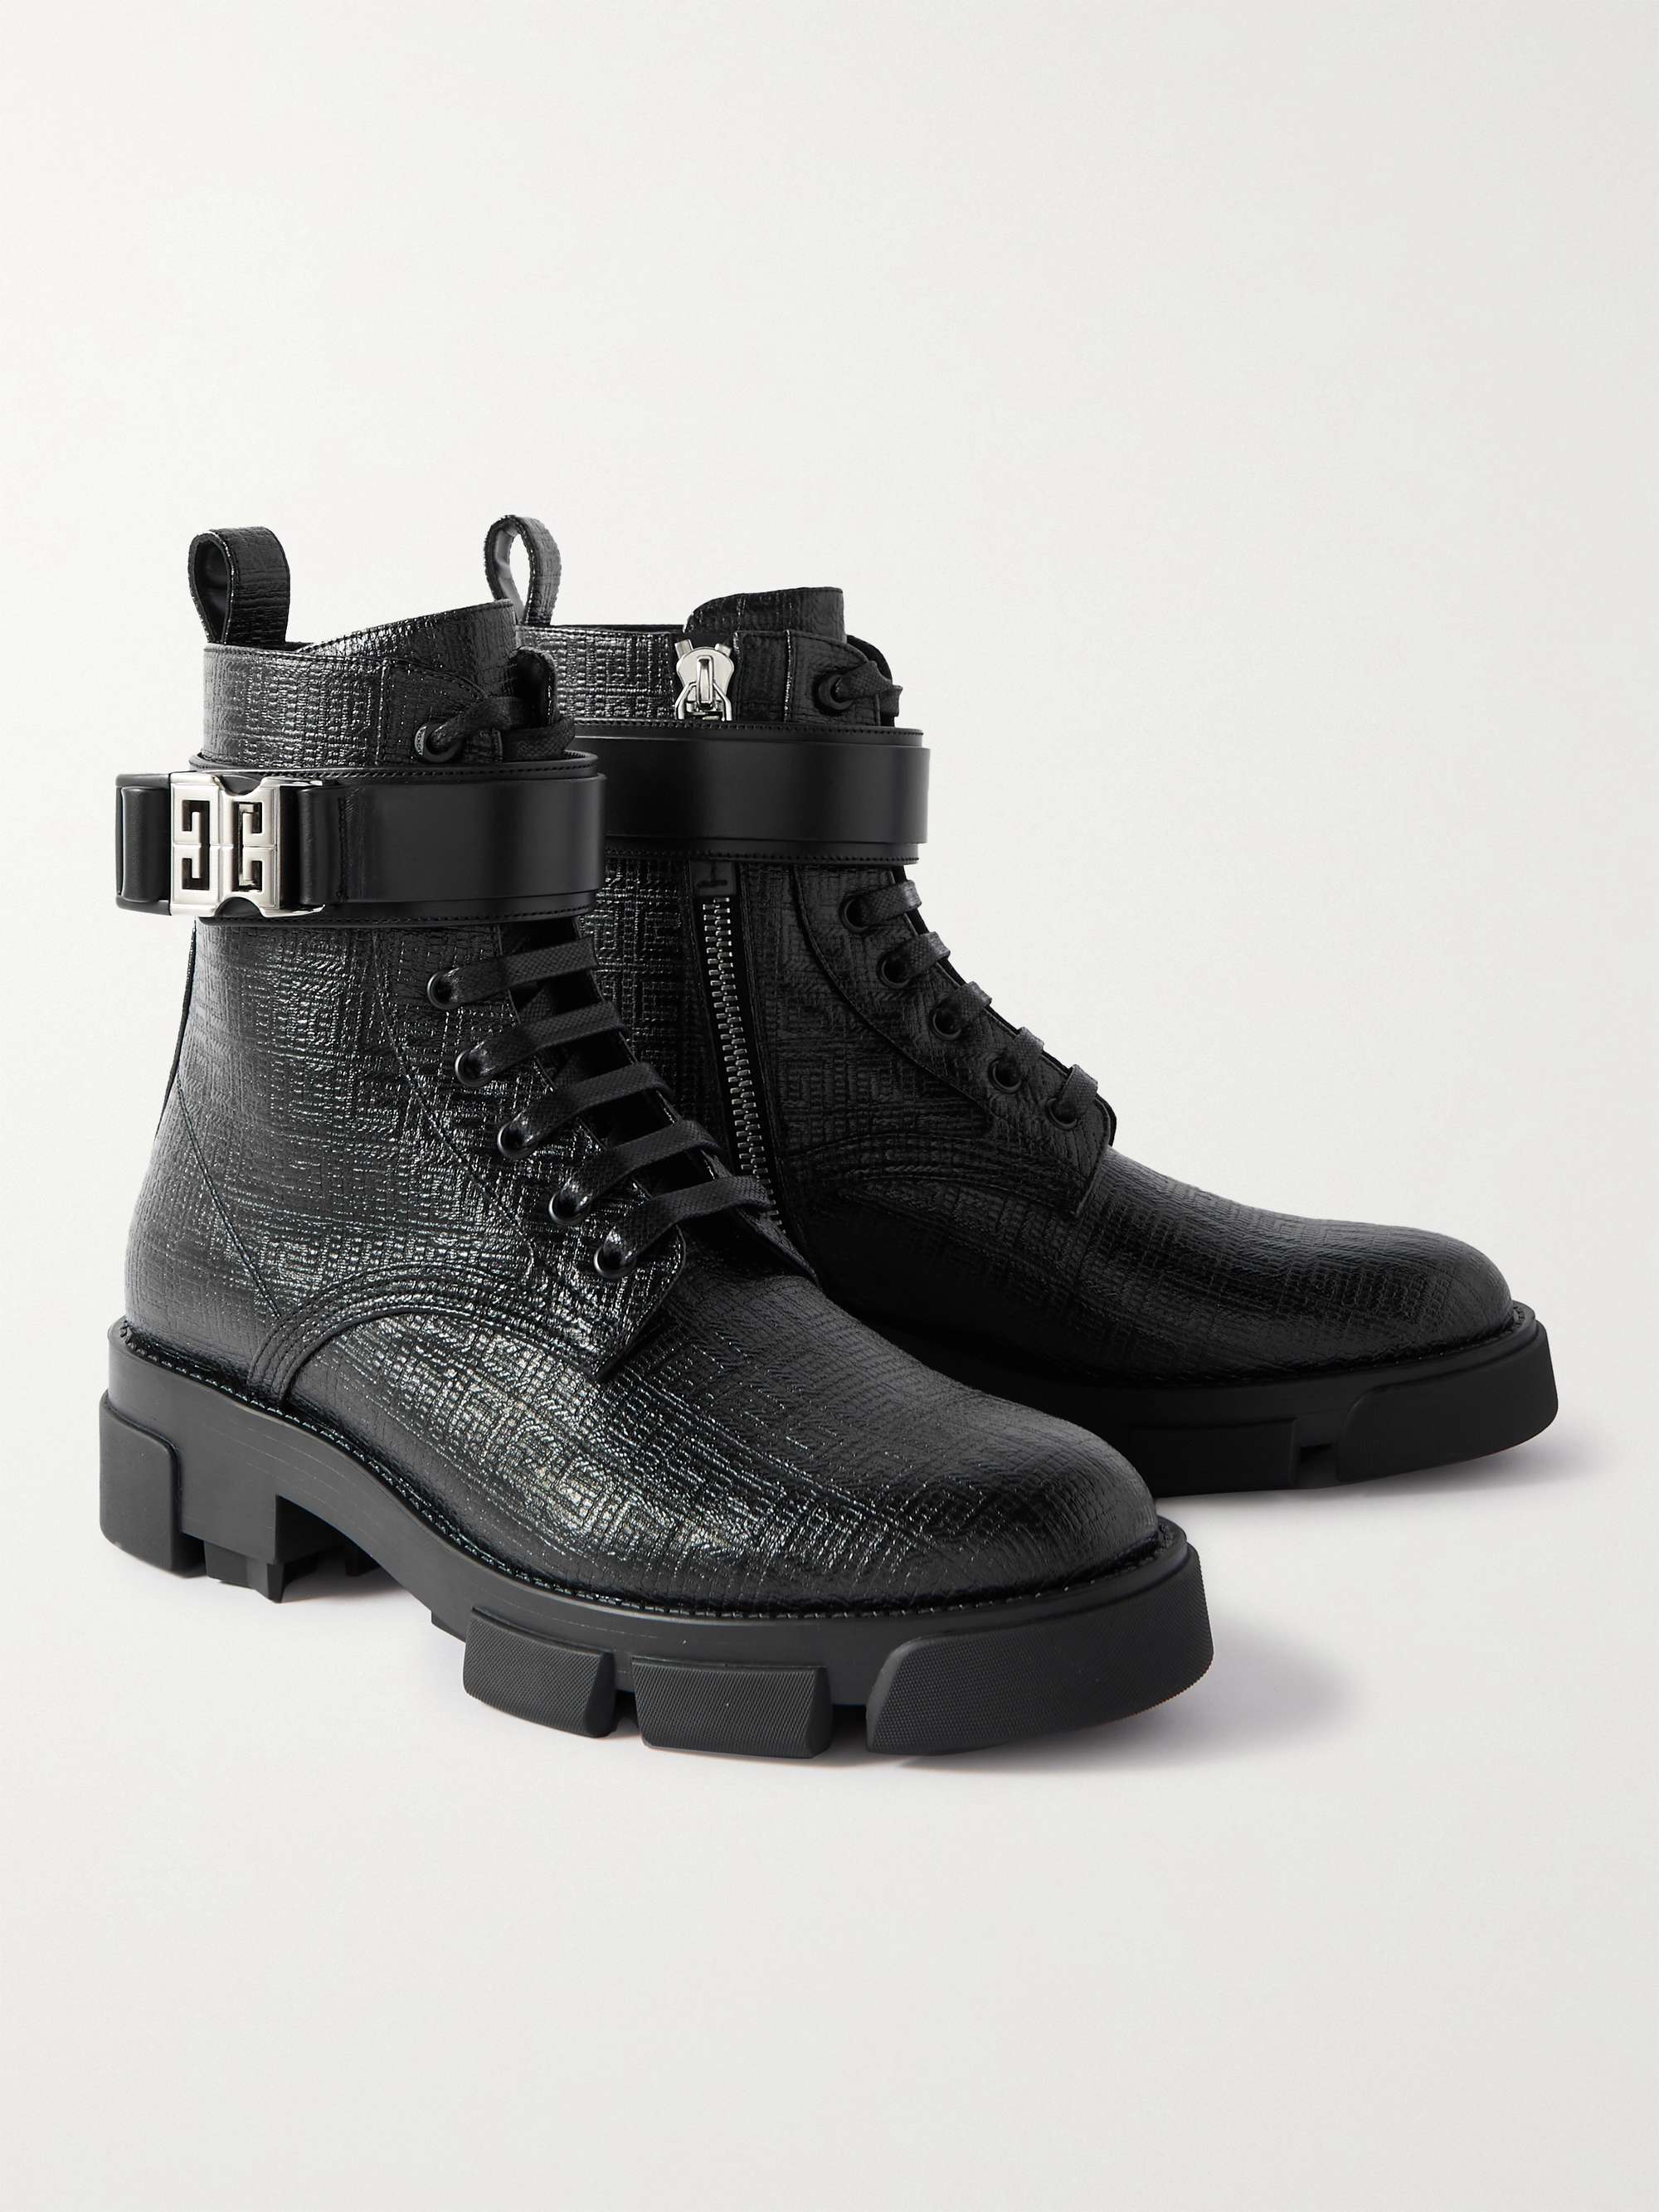 GIVENCHY Buckled Full-Grain Leather Boots for Men | MR PORTER